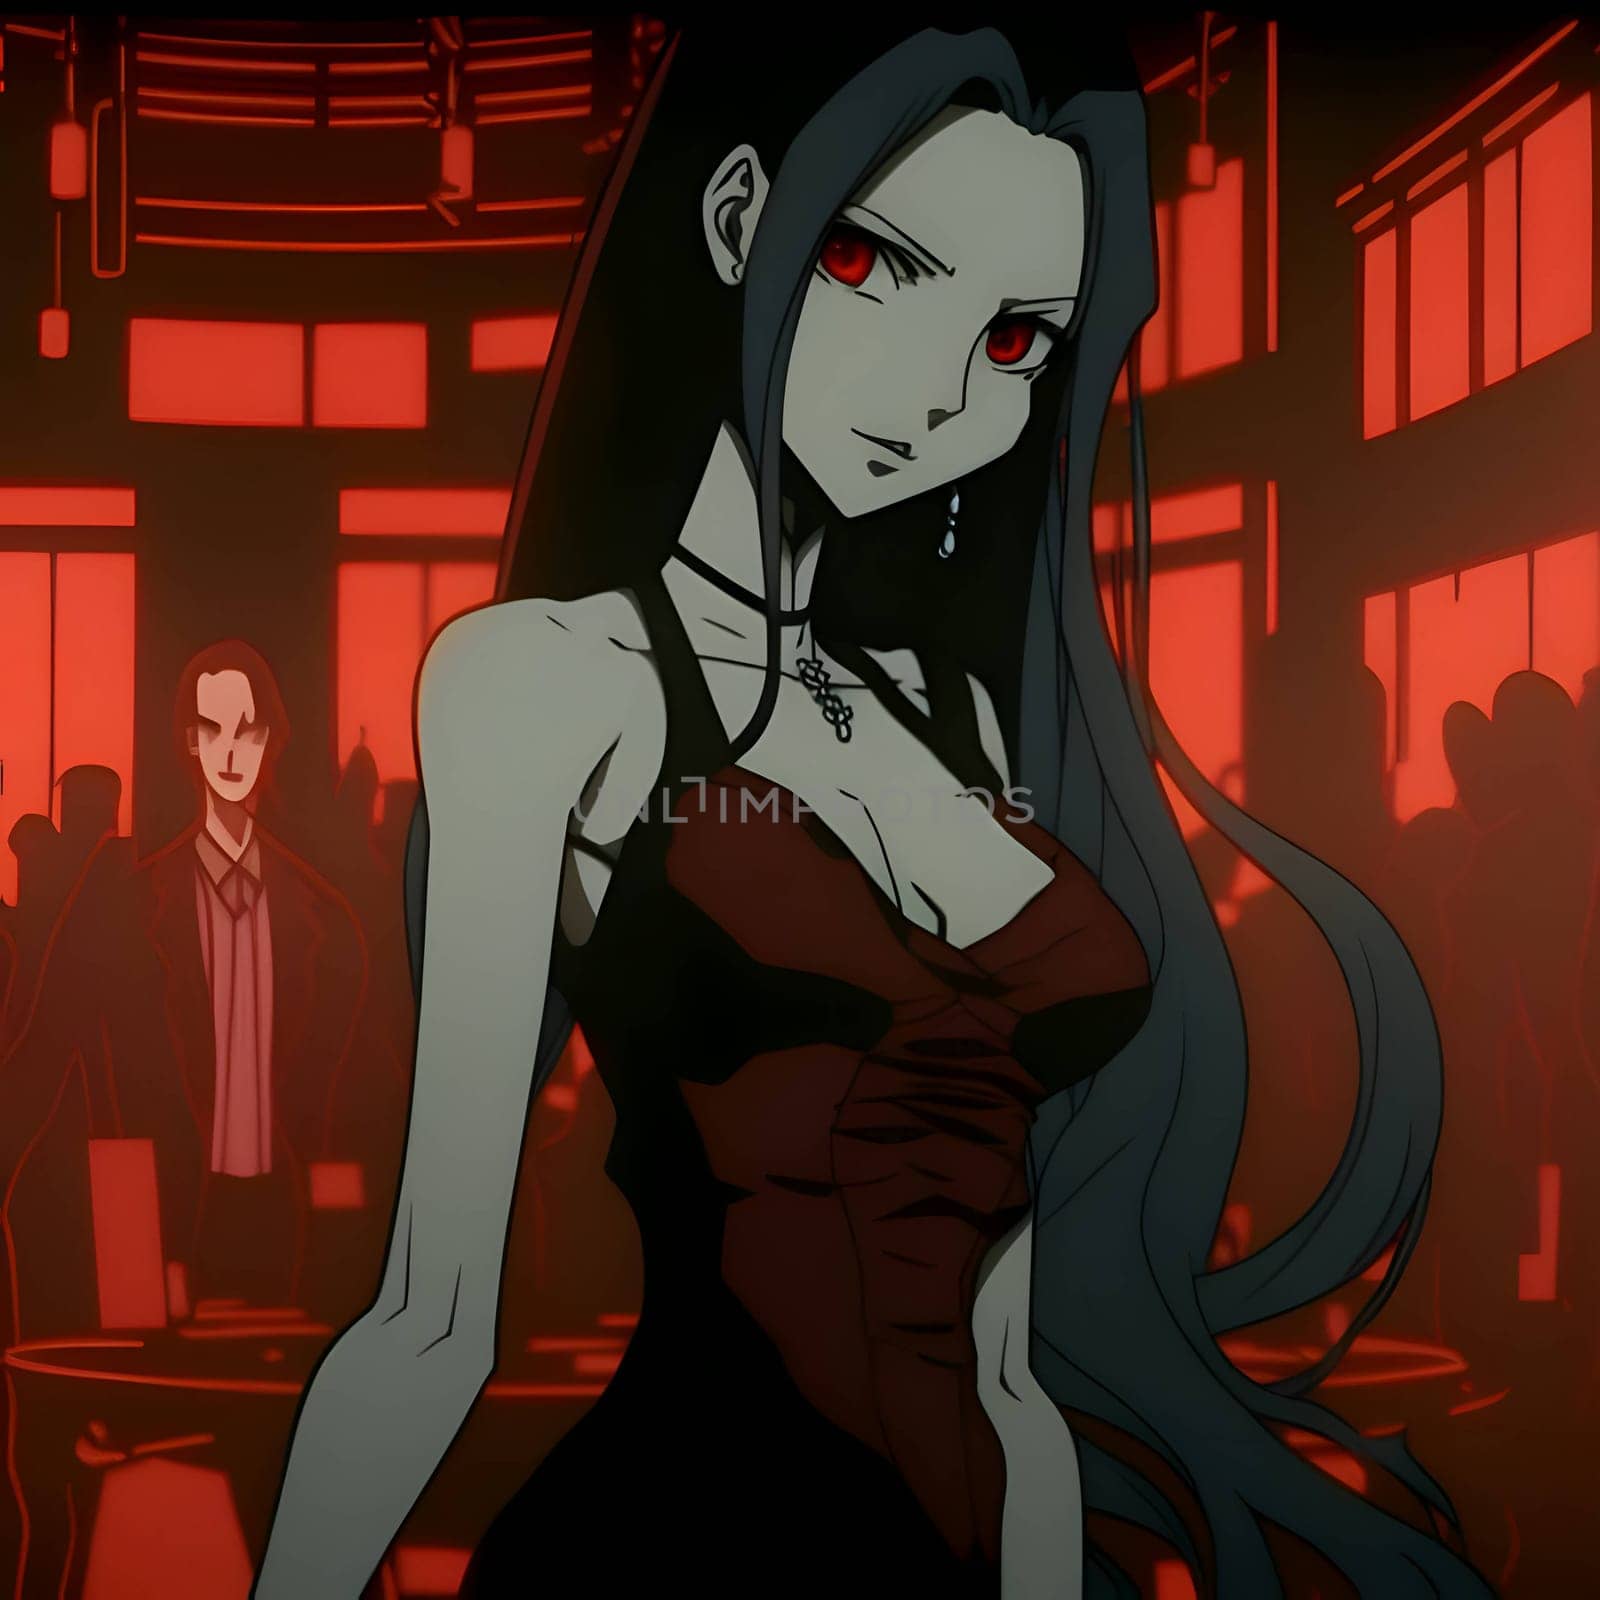 An animated girl dances in a vibrant club, surrounded by a dynamic composition of red and black, creating an energetic atmosphere.